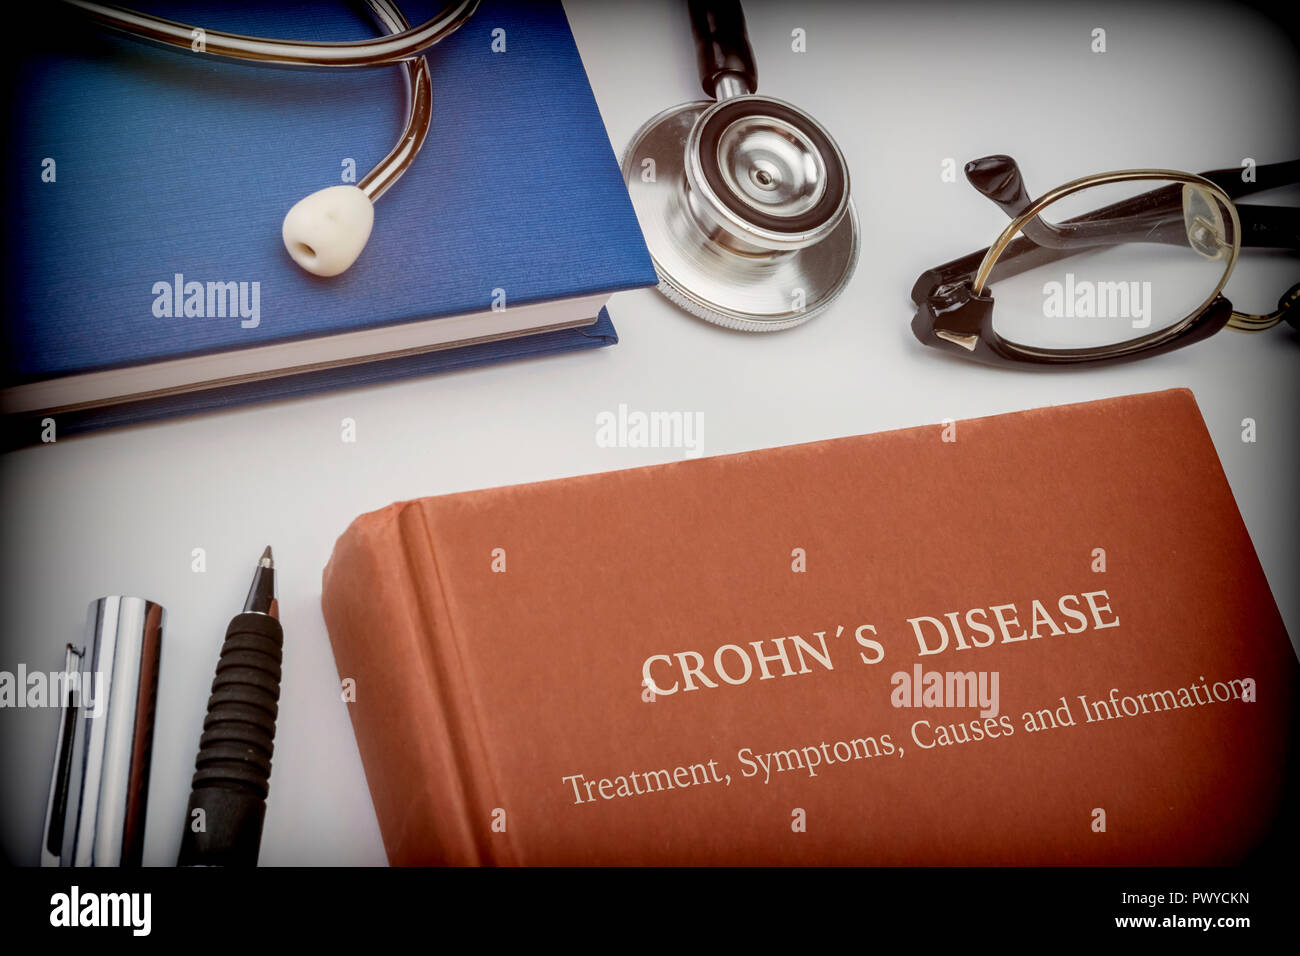 Titled book Crohn's Disease along with medical equipment, conceptual image Stock Photo